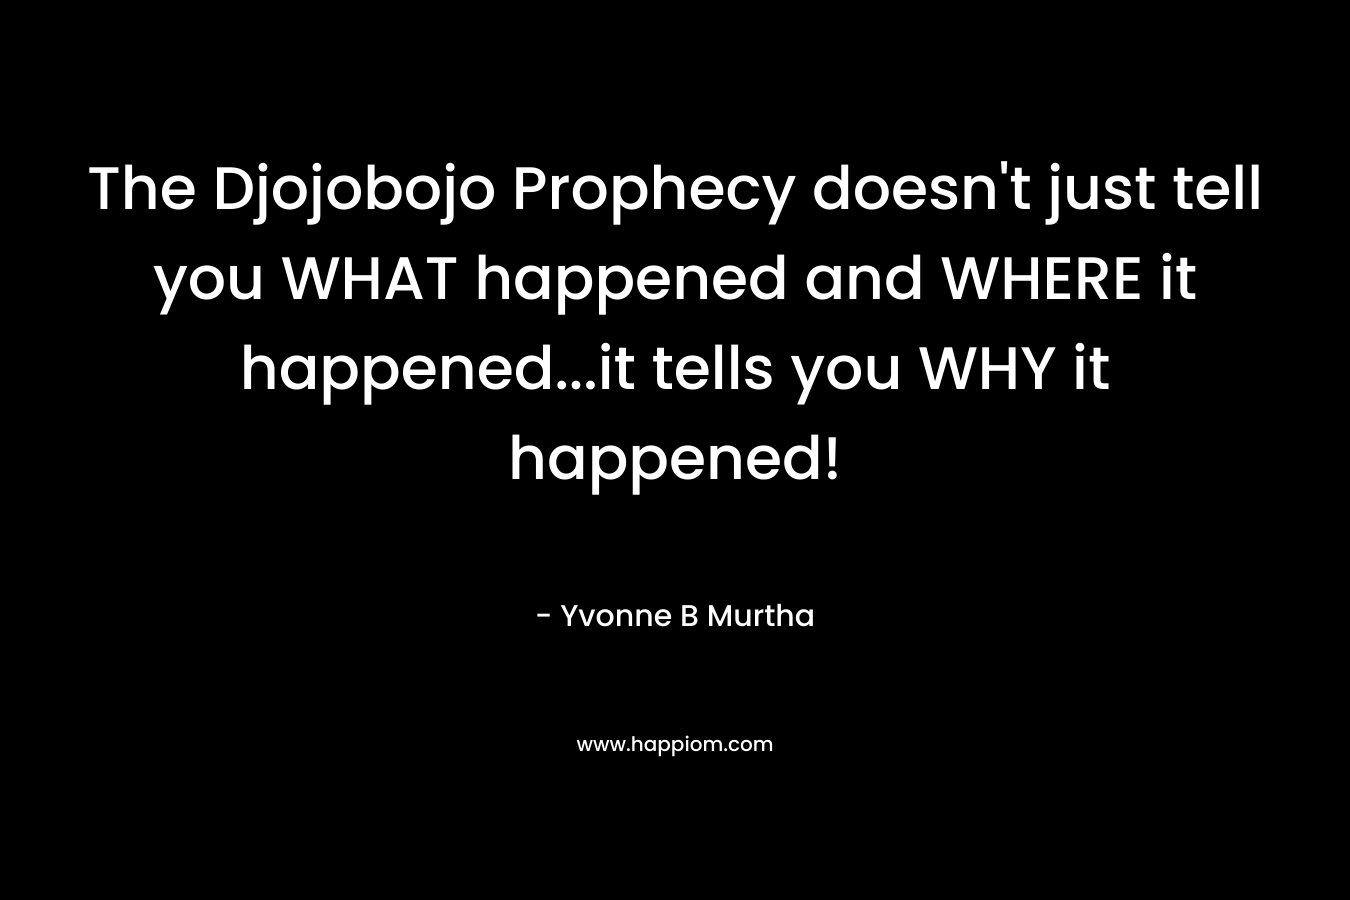 The Djojobojo Prophecy doesn't just tell you WHAT happened and WHERE it happened...it tells you WHY it happened!